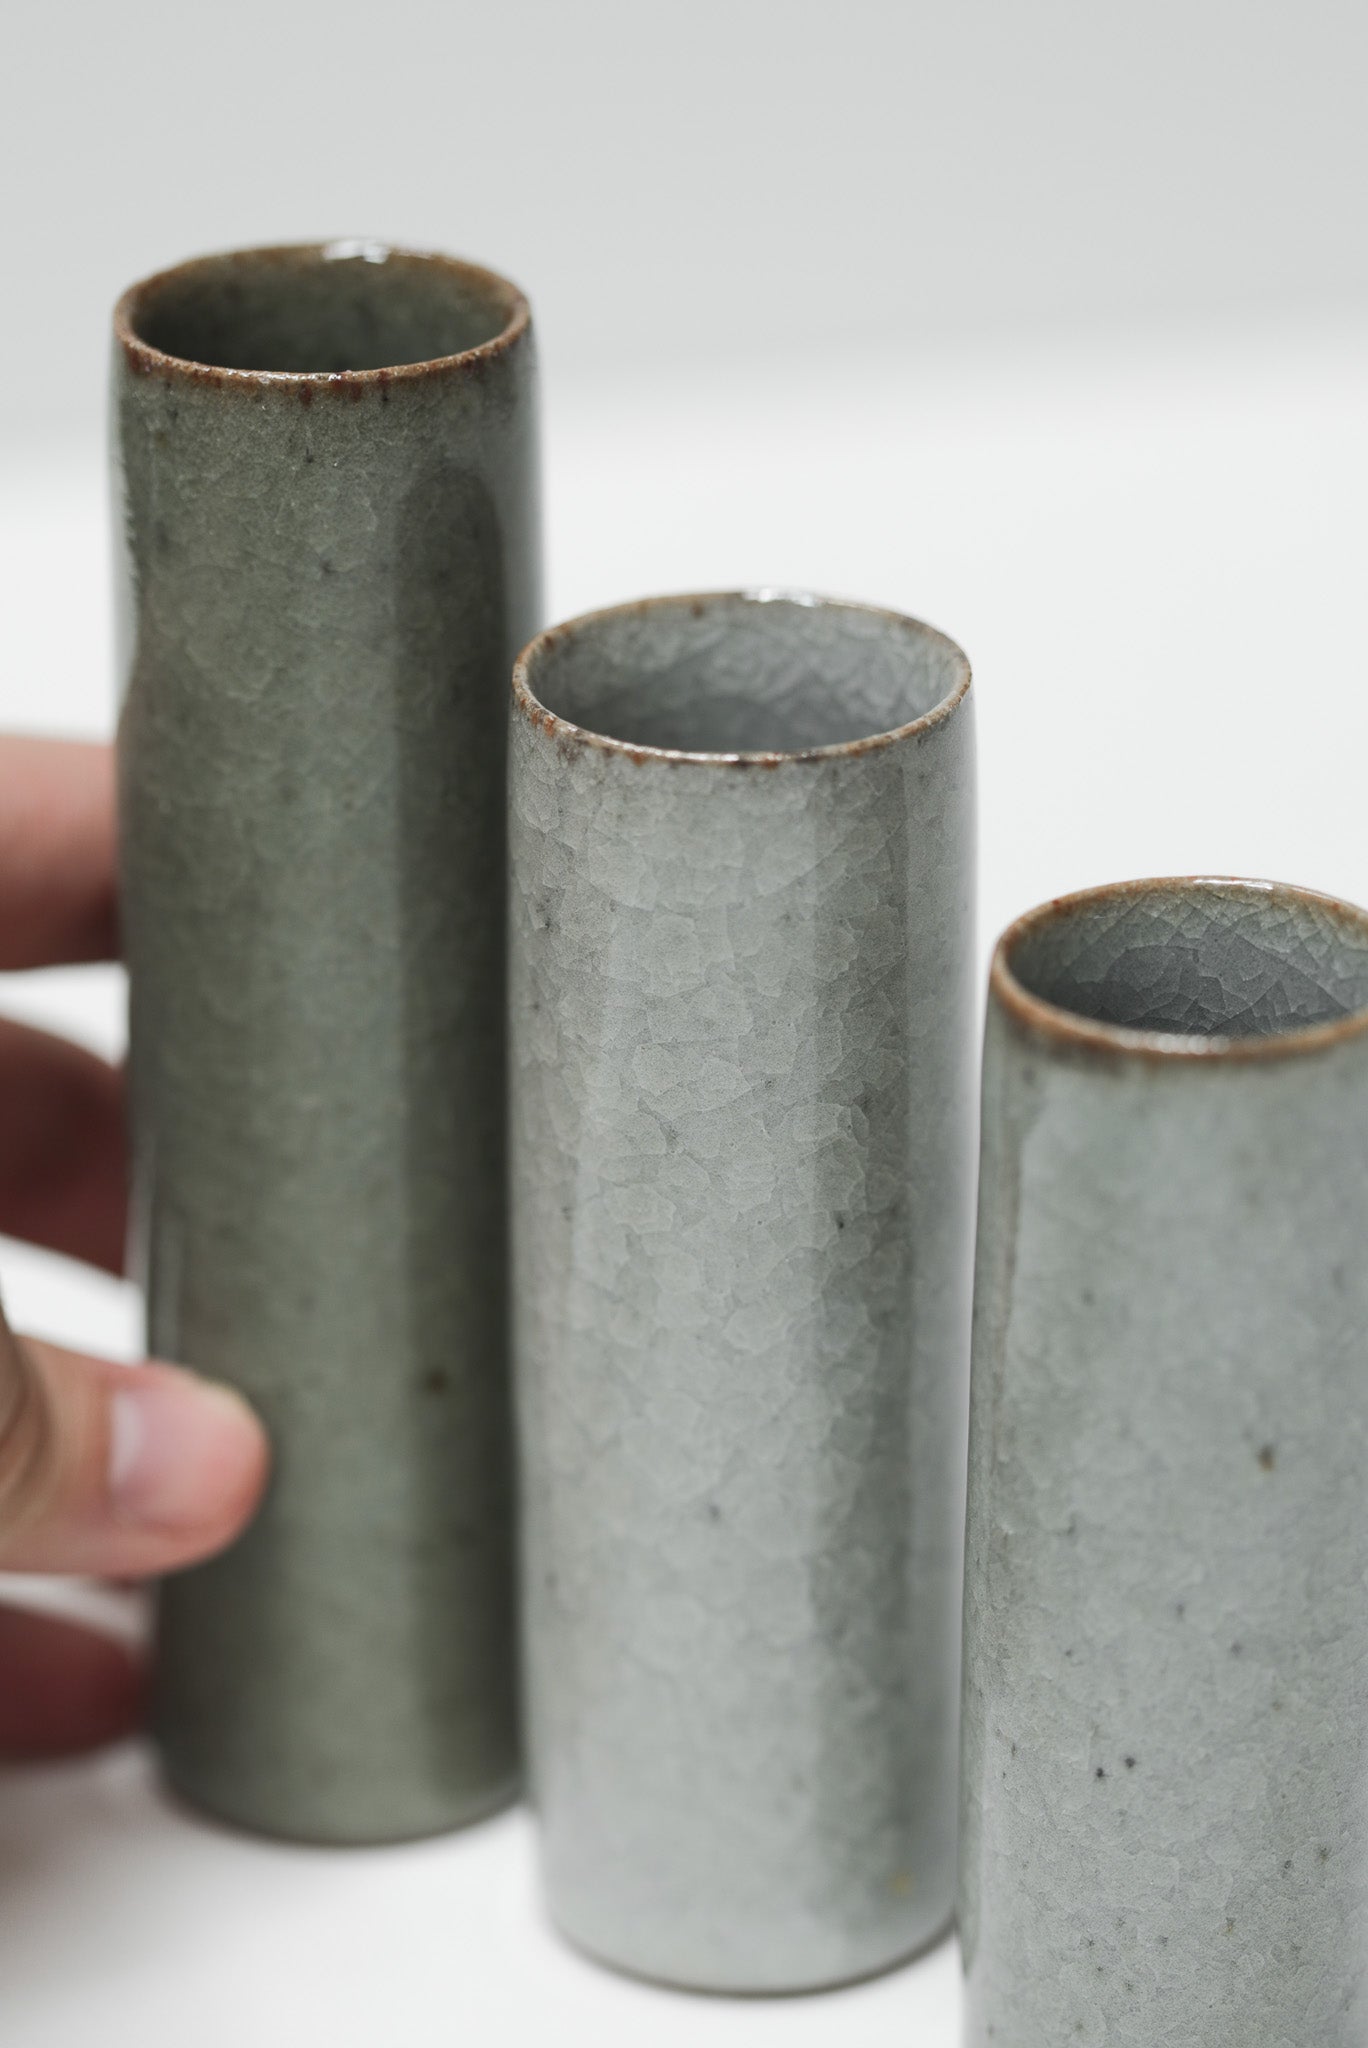 Florian Gadsby: Trio of Small Cylindrical Vases